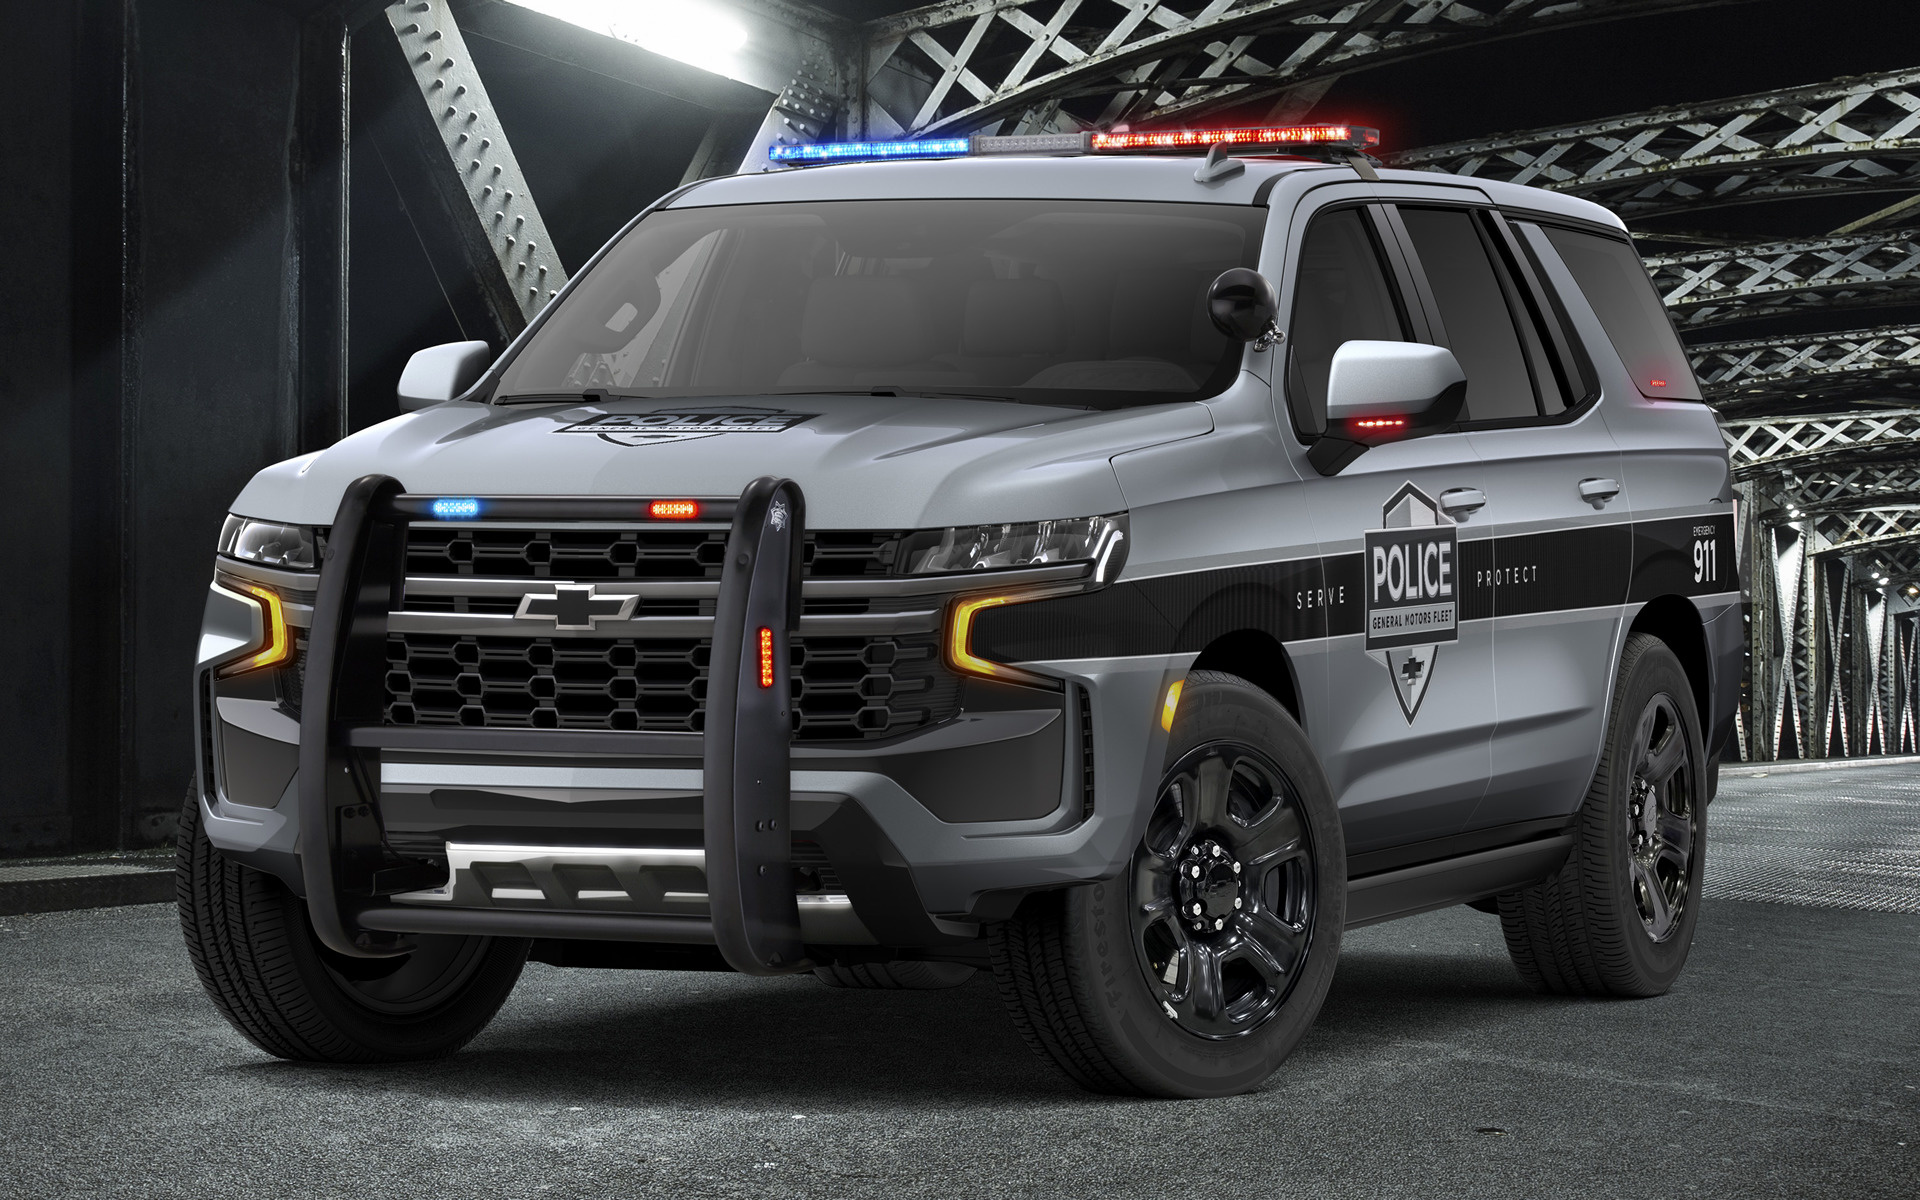 82  Gmc police car wallpaper for Android Wallpaper